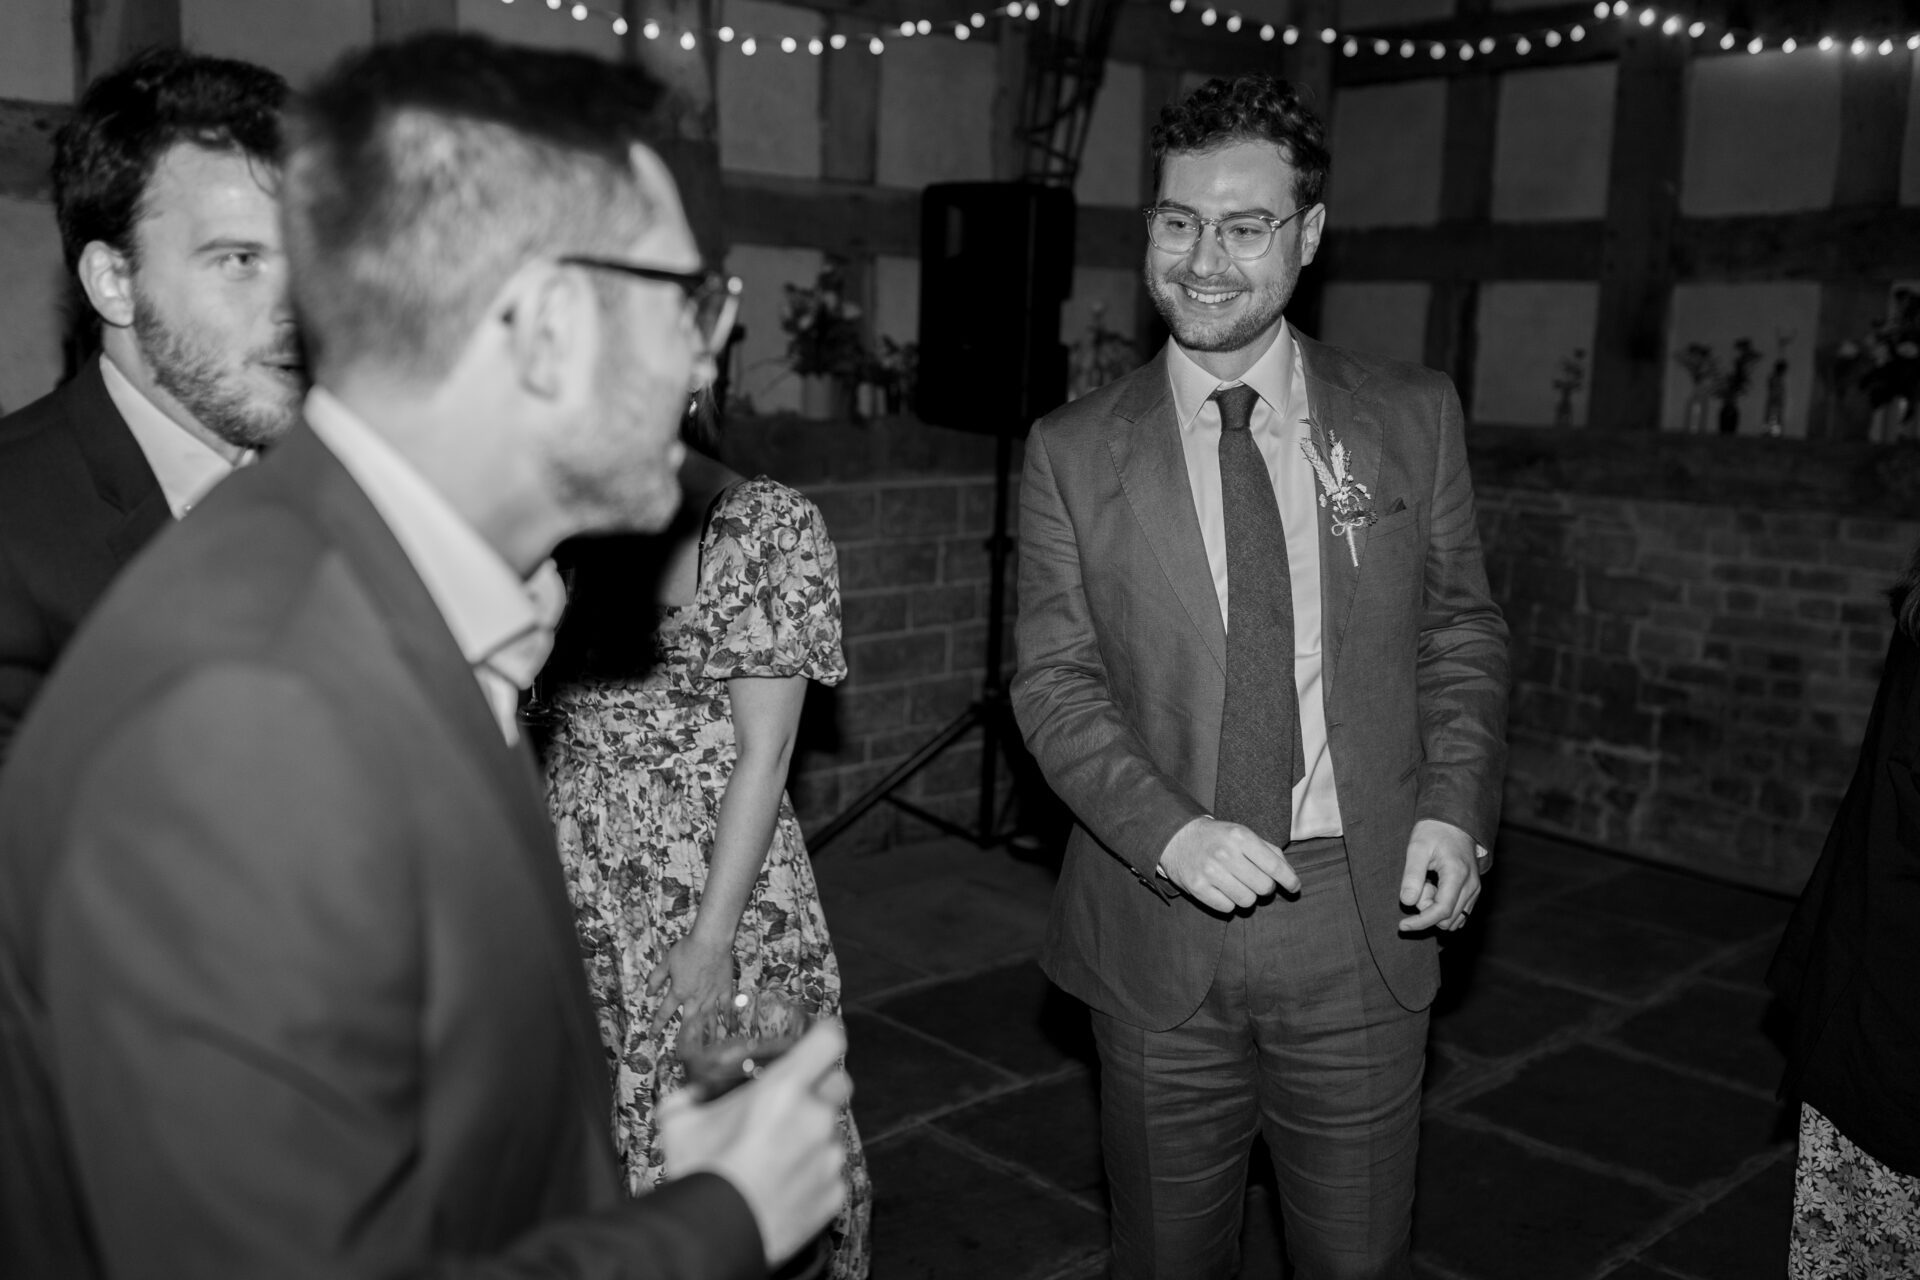 The groom dances with guests at the Wool Barn, Gloucestershire wedding venue